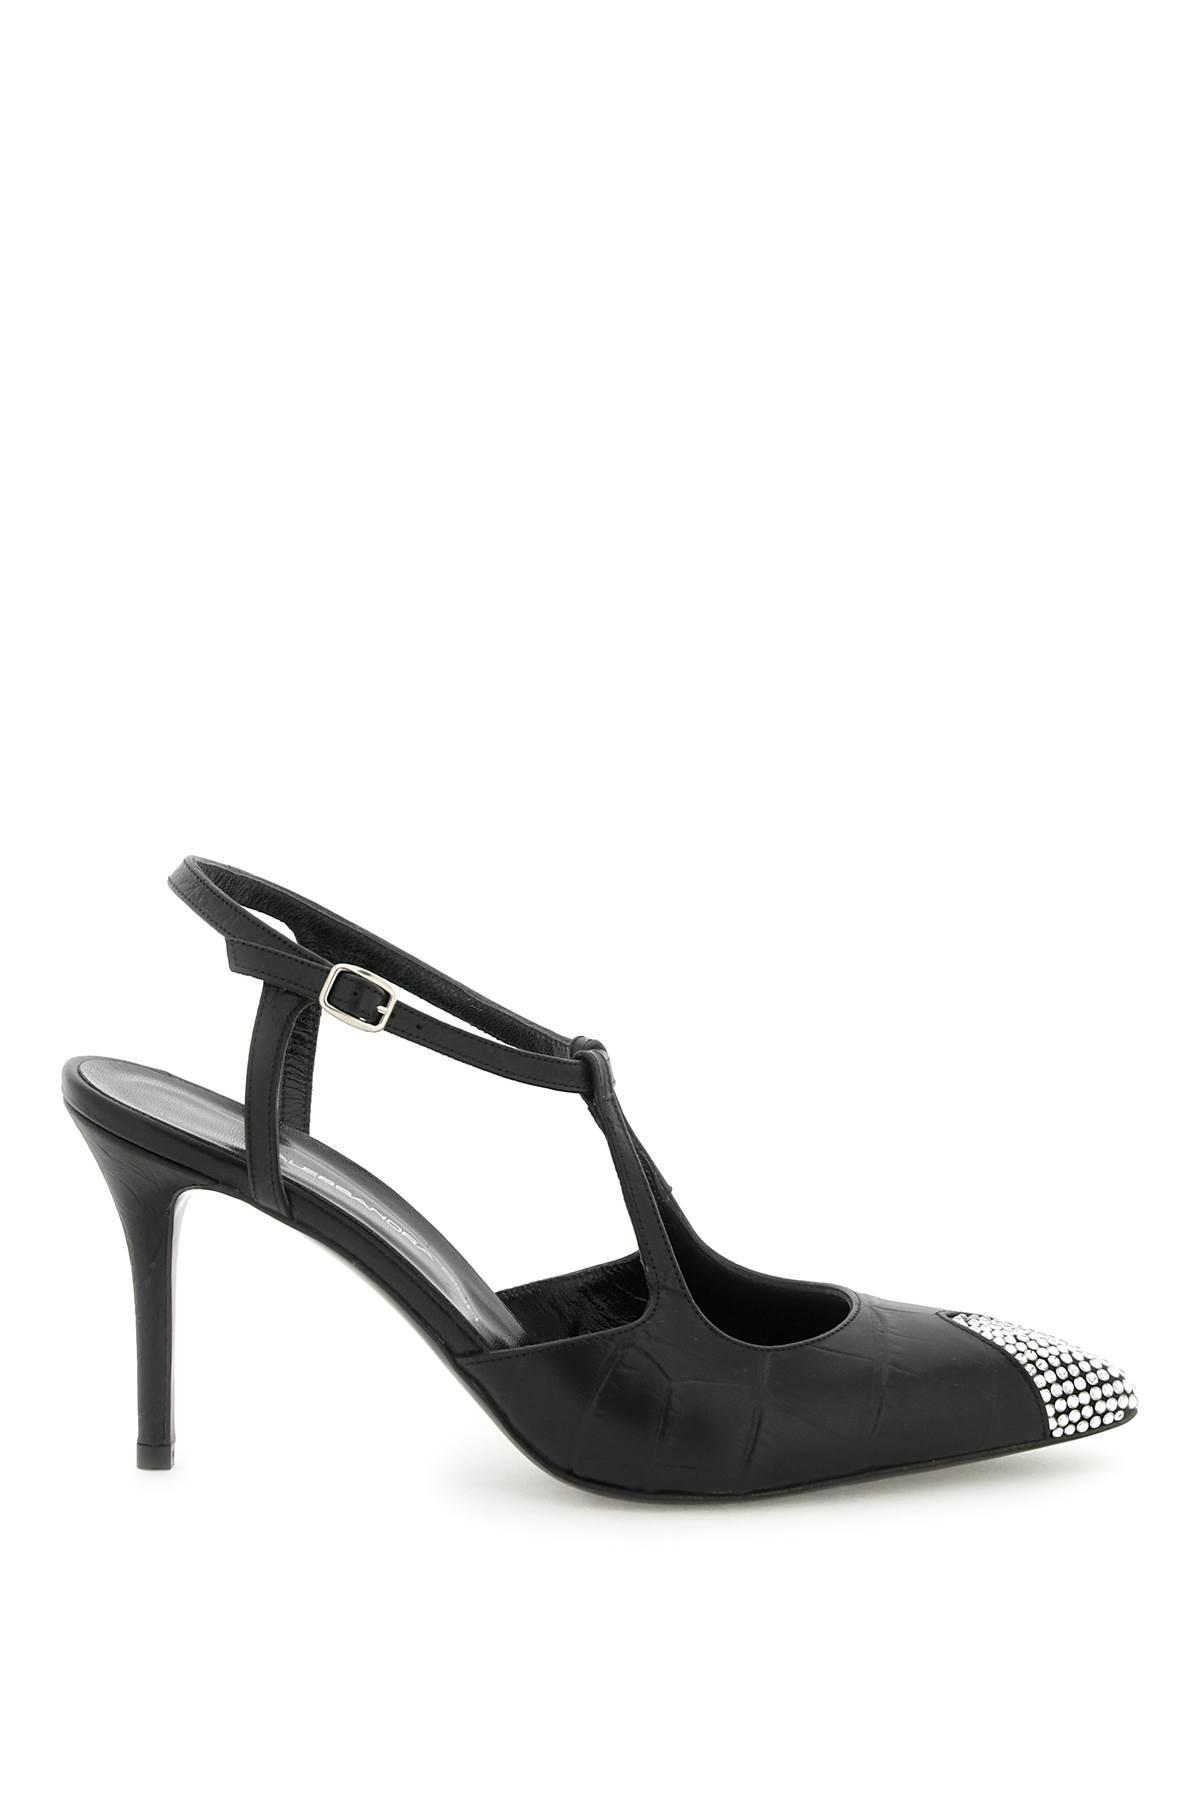 Alessandra Rich Leather Slingback Pumps With Crystal Point in Black | Lyst